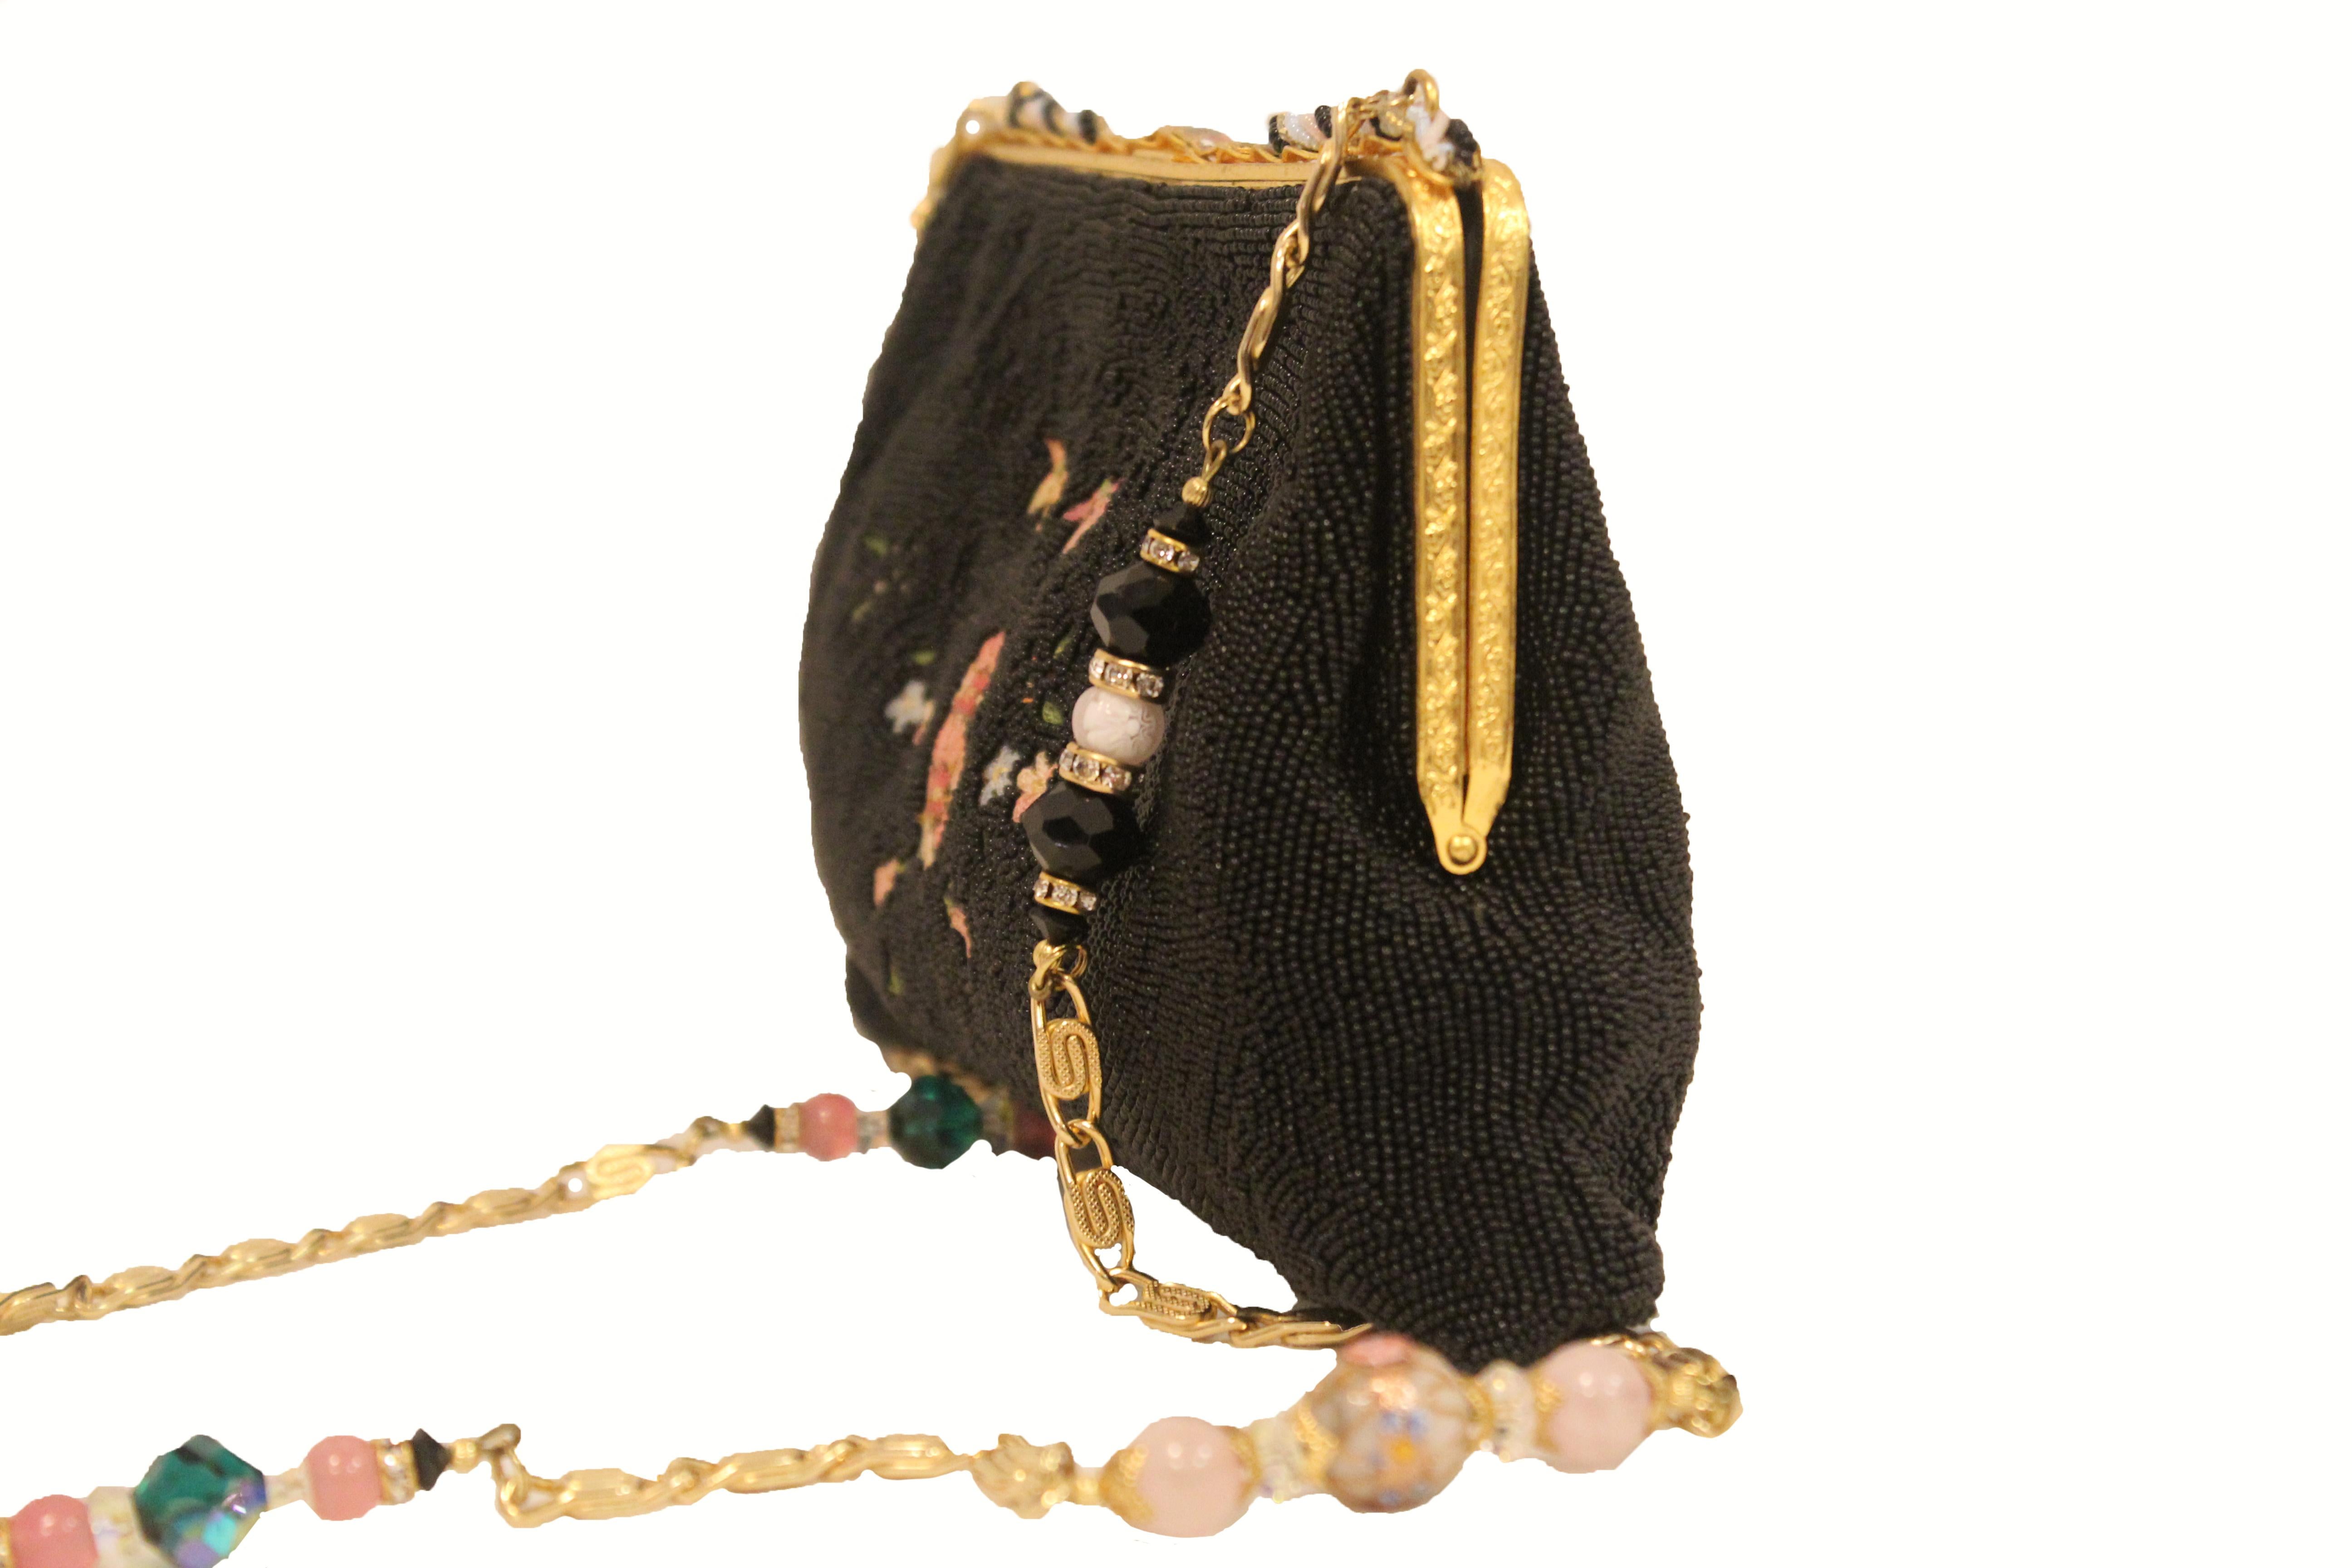 This is a quality made elegant beaded evening handbag with a keen visual appeal. The body of this purse appears to be all the same tone of black beads and it is in excellent condition.  The French led the way when it came to elegant beaded evening